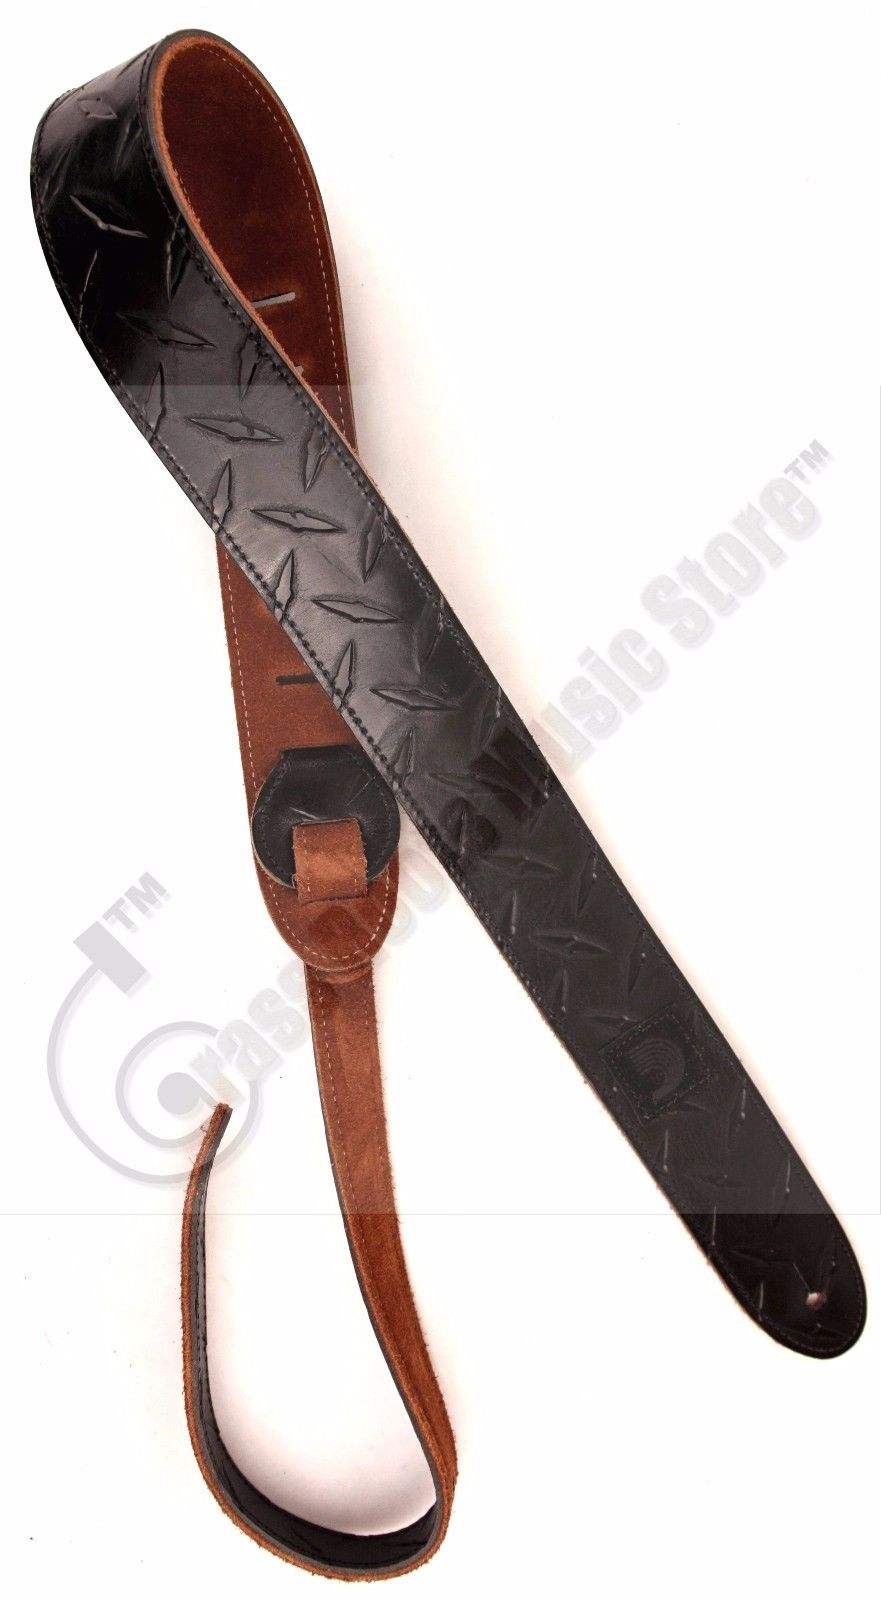 D'Addario PLANET WAVES Diamond Plate Embossed Leather Guitar Strap 2" - Black